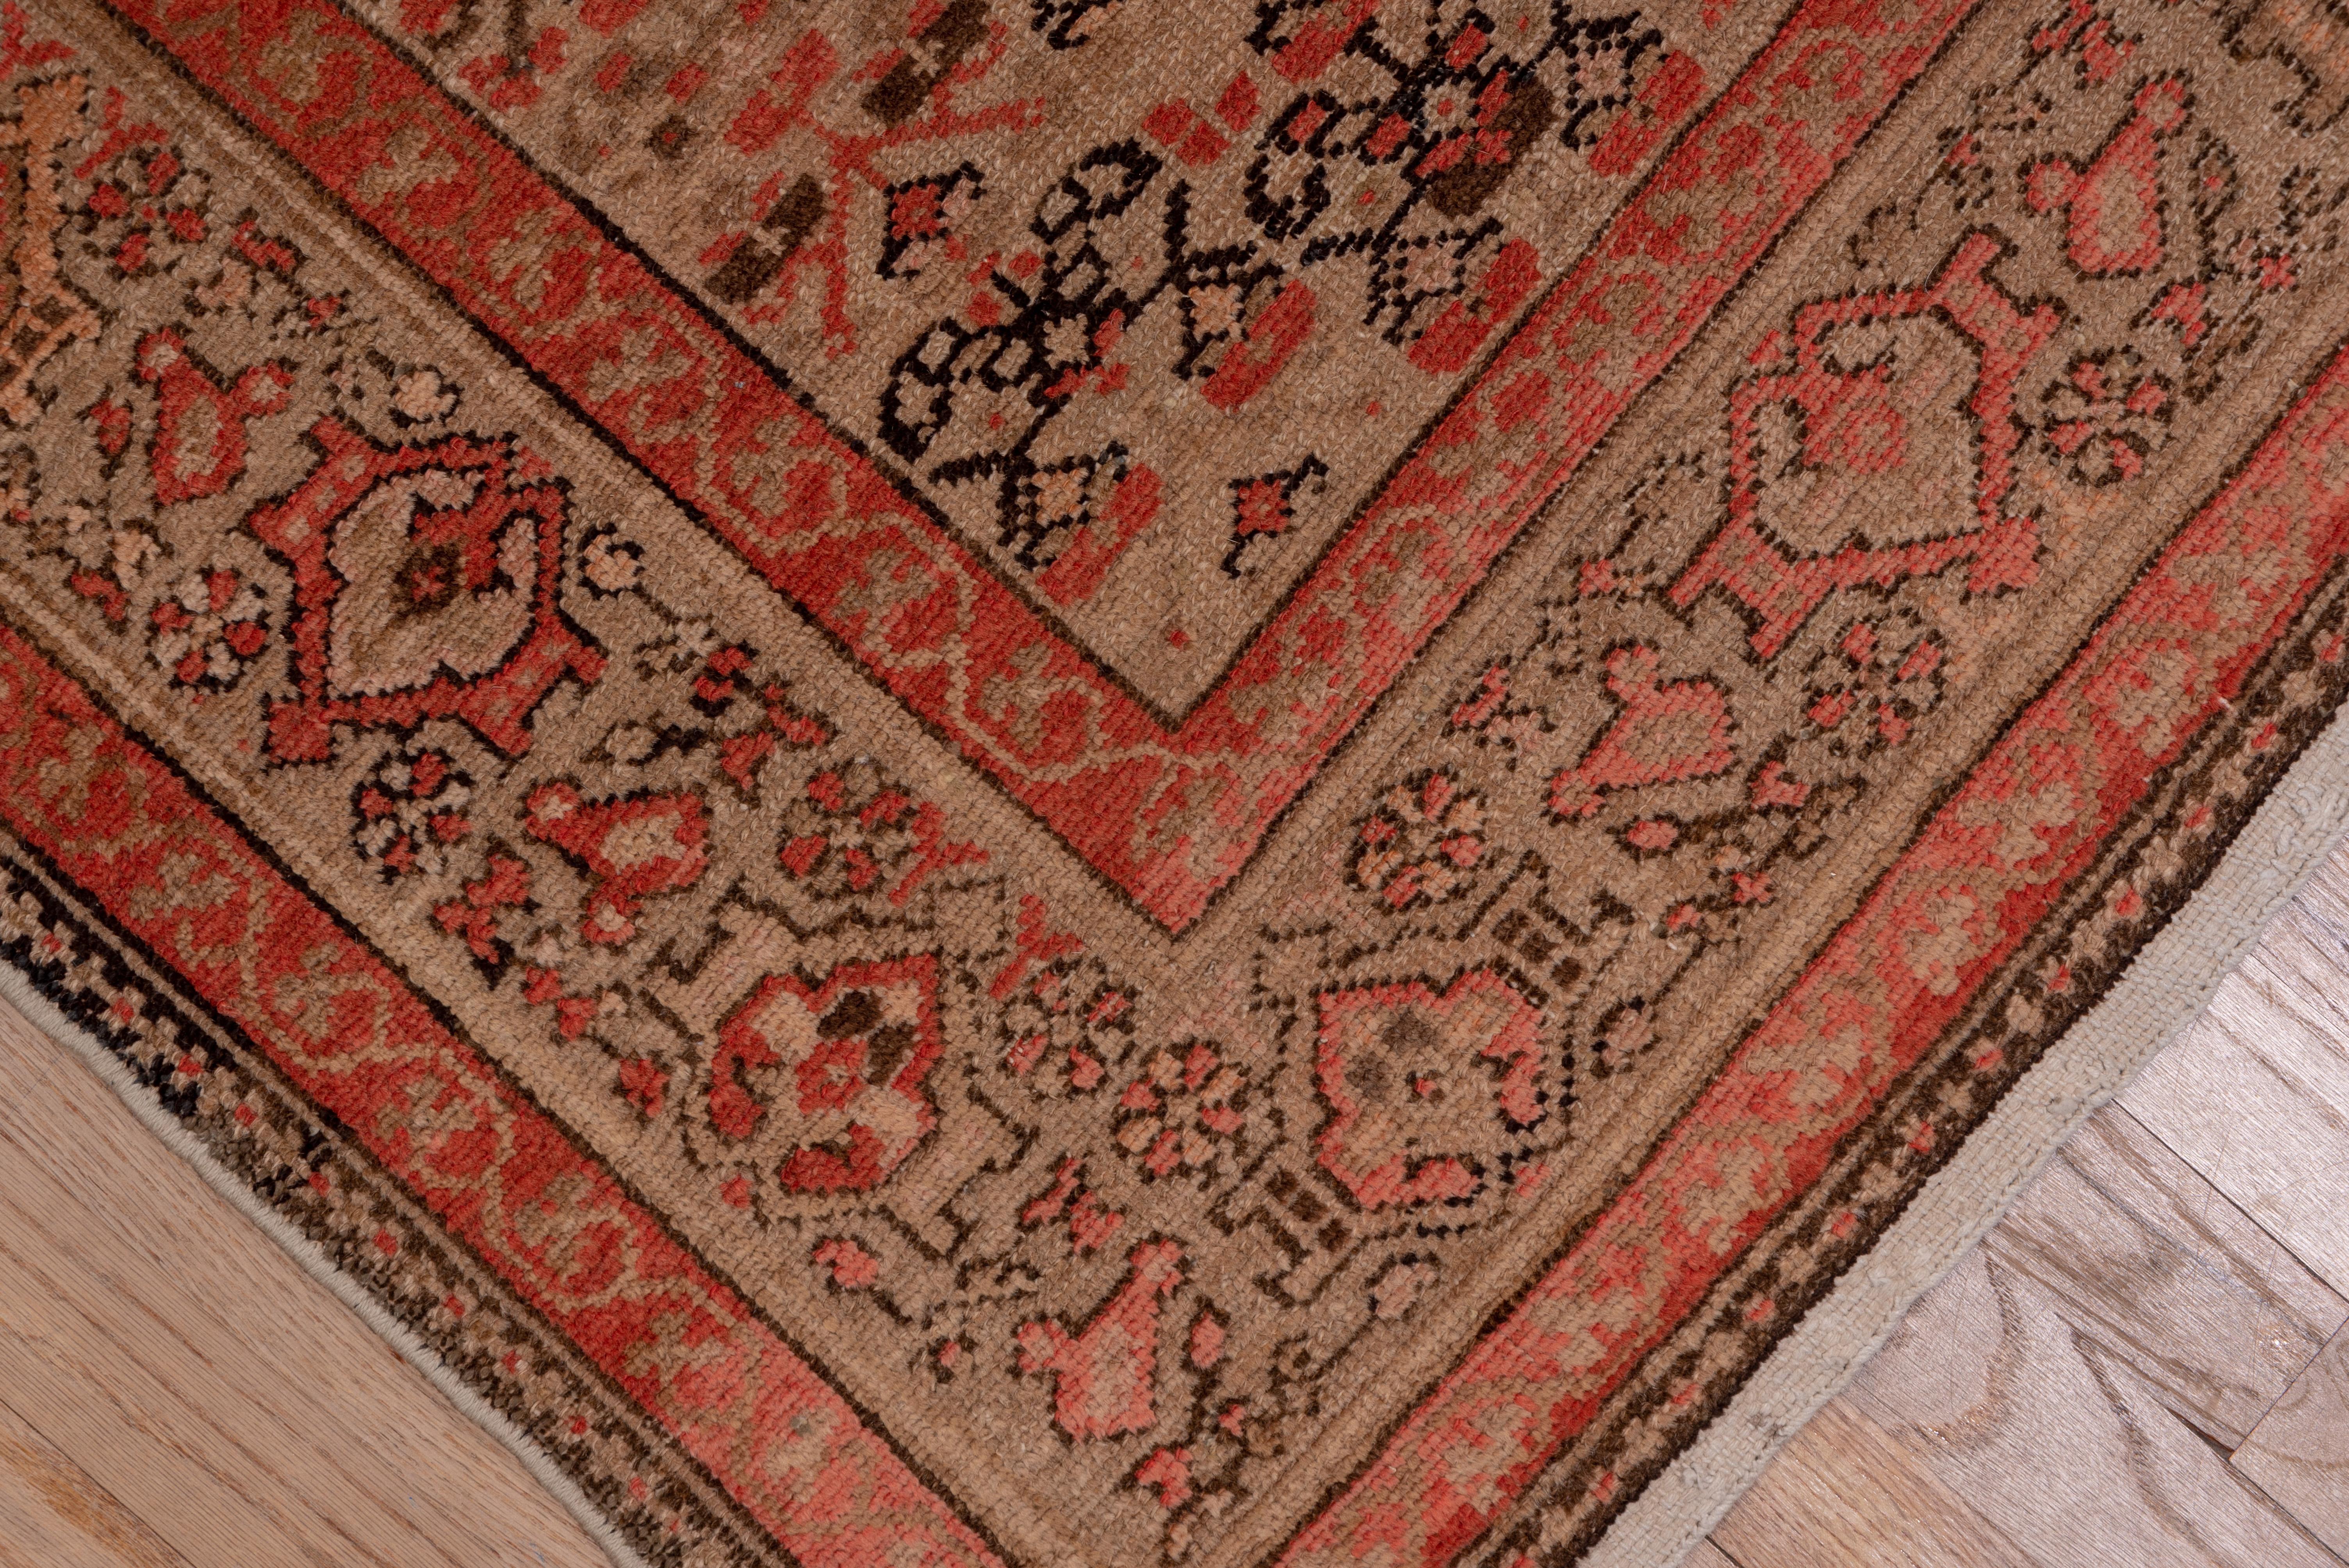 Wool Antique Persian Malayer Gallery Rug, Red and Brown Field, Coral Tones For Sale